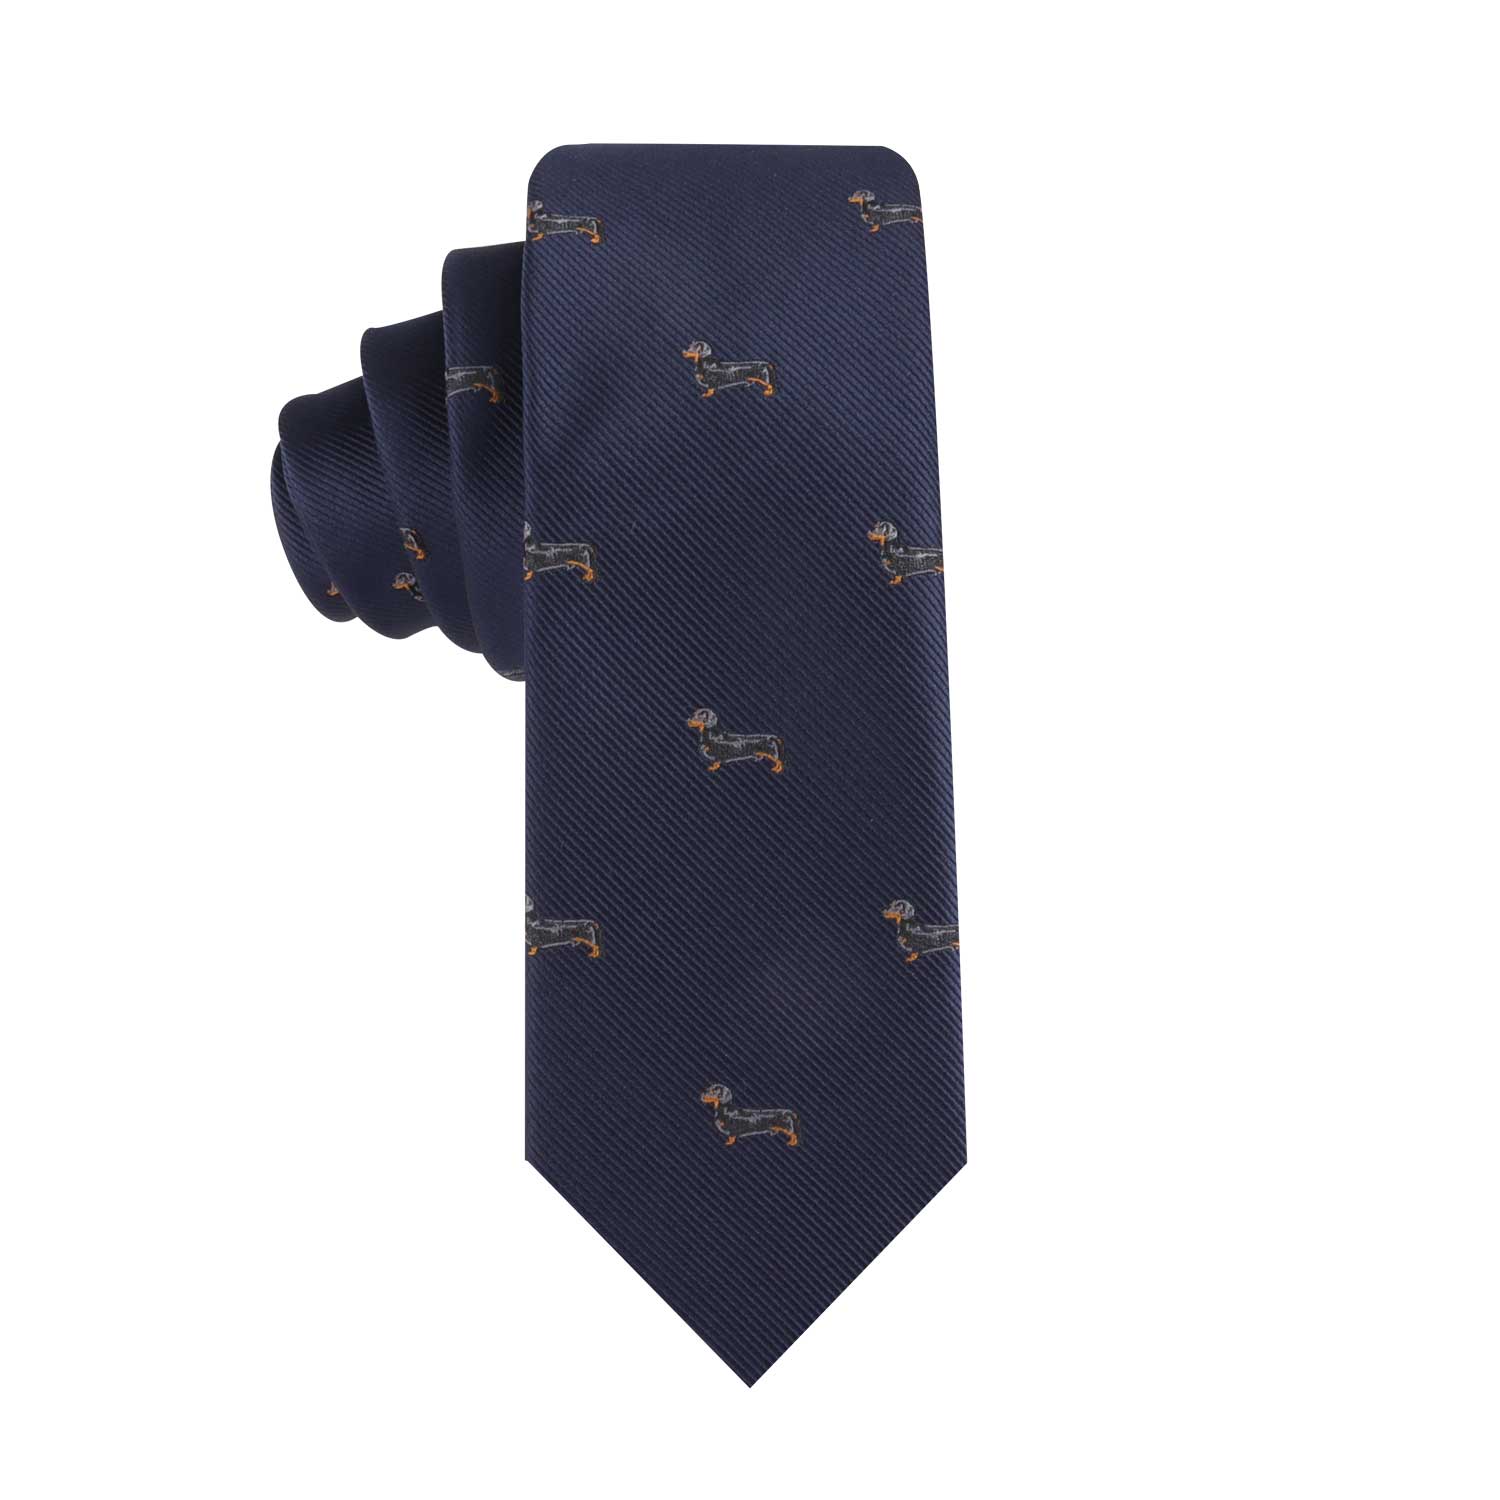 A Sausage Dog Skinny Tie, adding a playful look and quirky charm to any outfit.